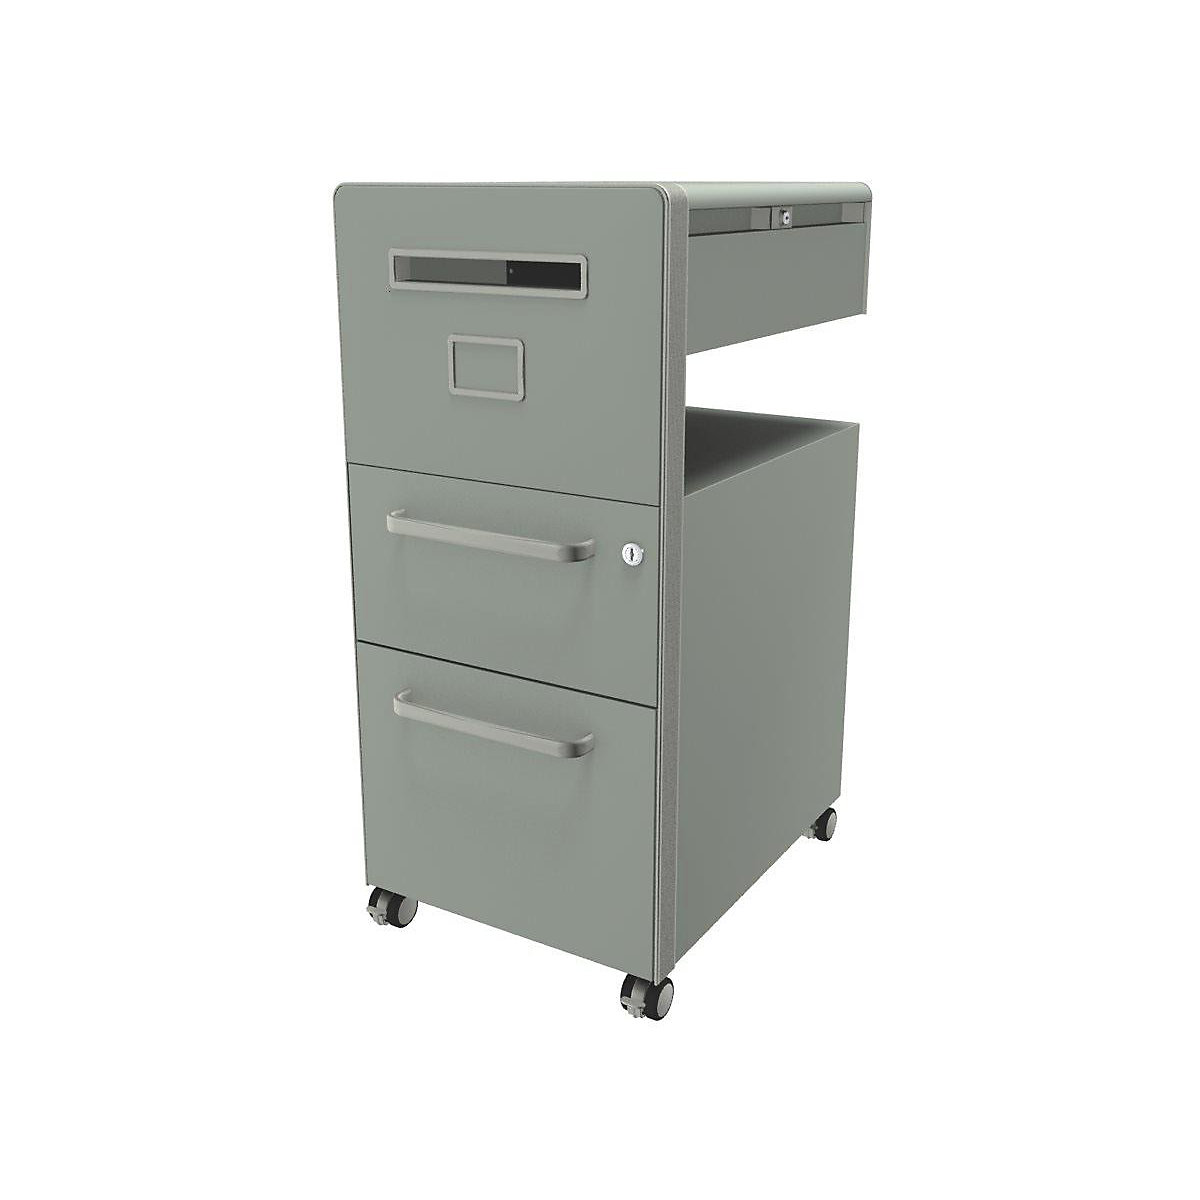 Bite™ pedestal furniture, with 1 pin board, opens on the left side – BISLEY, with 1 universal drawer, 1 suspension file drawer, york-28